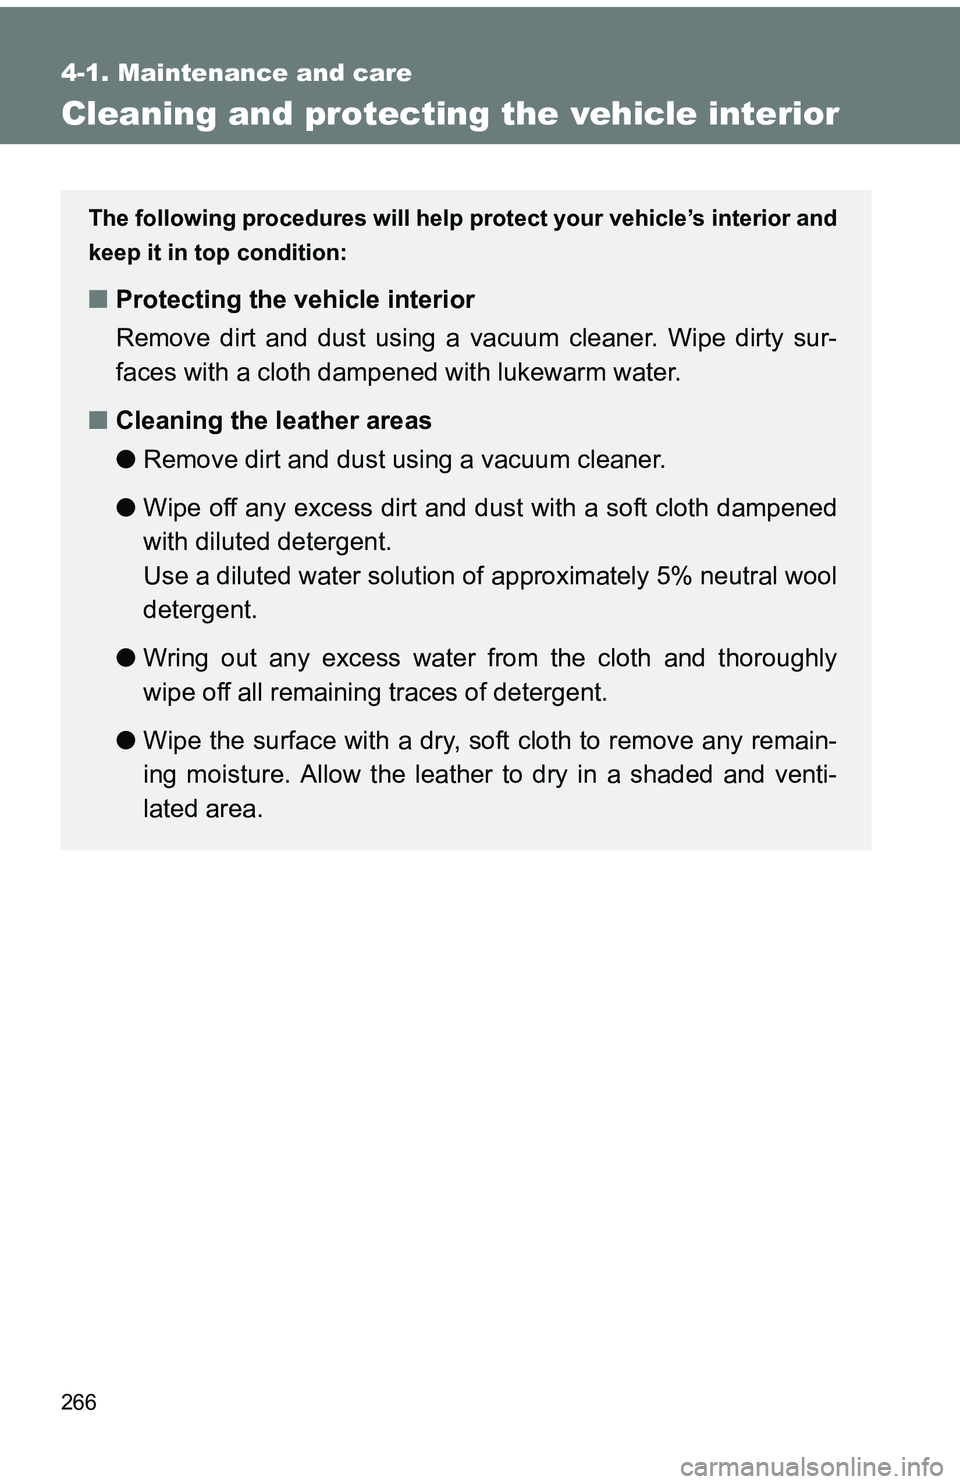 TOYOTA tC 2011  Owners Manual (in English) 266
4-1. Maintenance and care
Cleaning and protecting the vehicle interior
The following procedures will help protect your vehicle’s interior and
keep it in top condition:
■ Protecting the vehicle